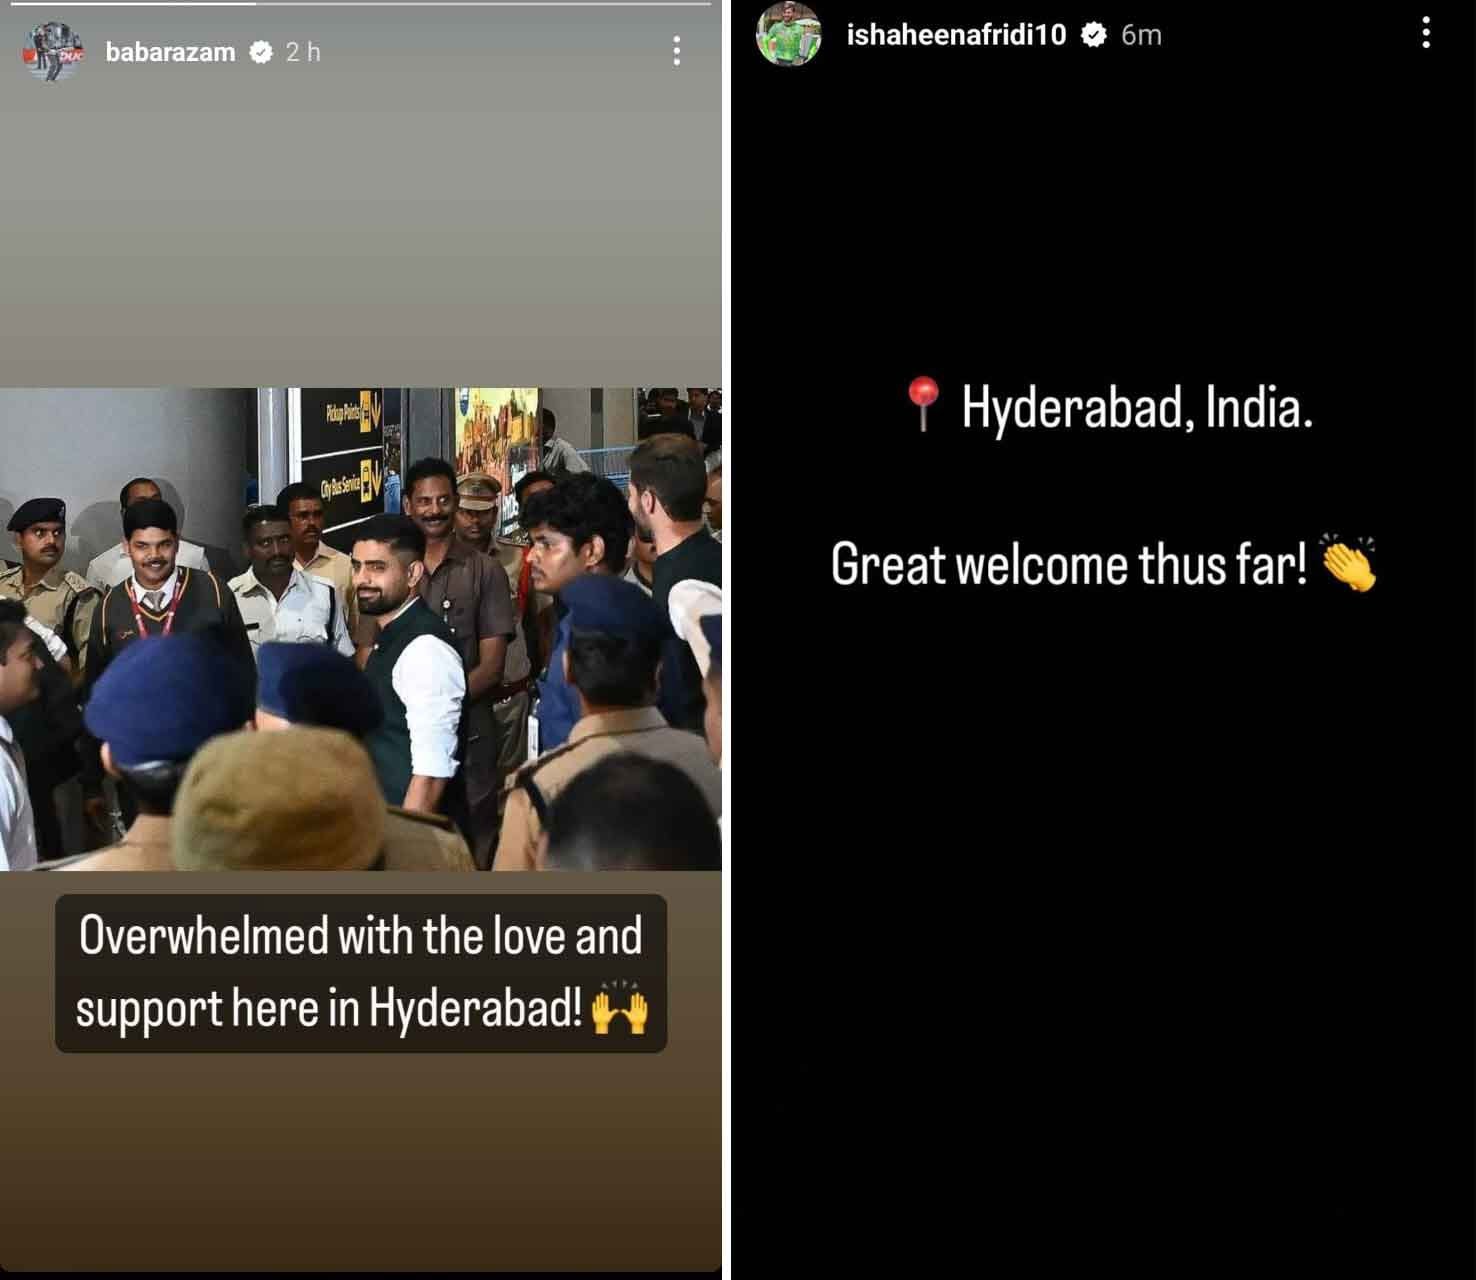 Messages posted by Babar Azam and Shaheen Shah Afridi on Instagram after they landed in India on September 27.